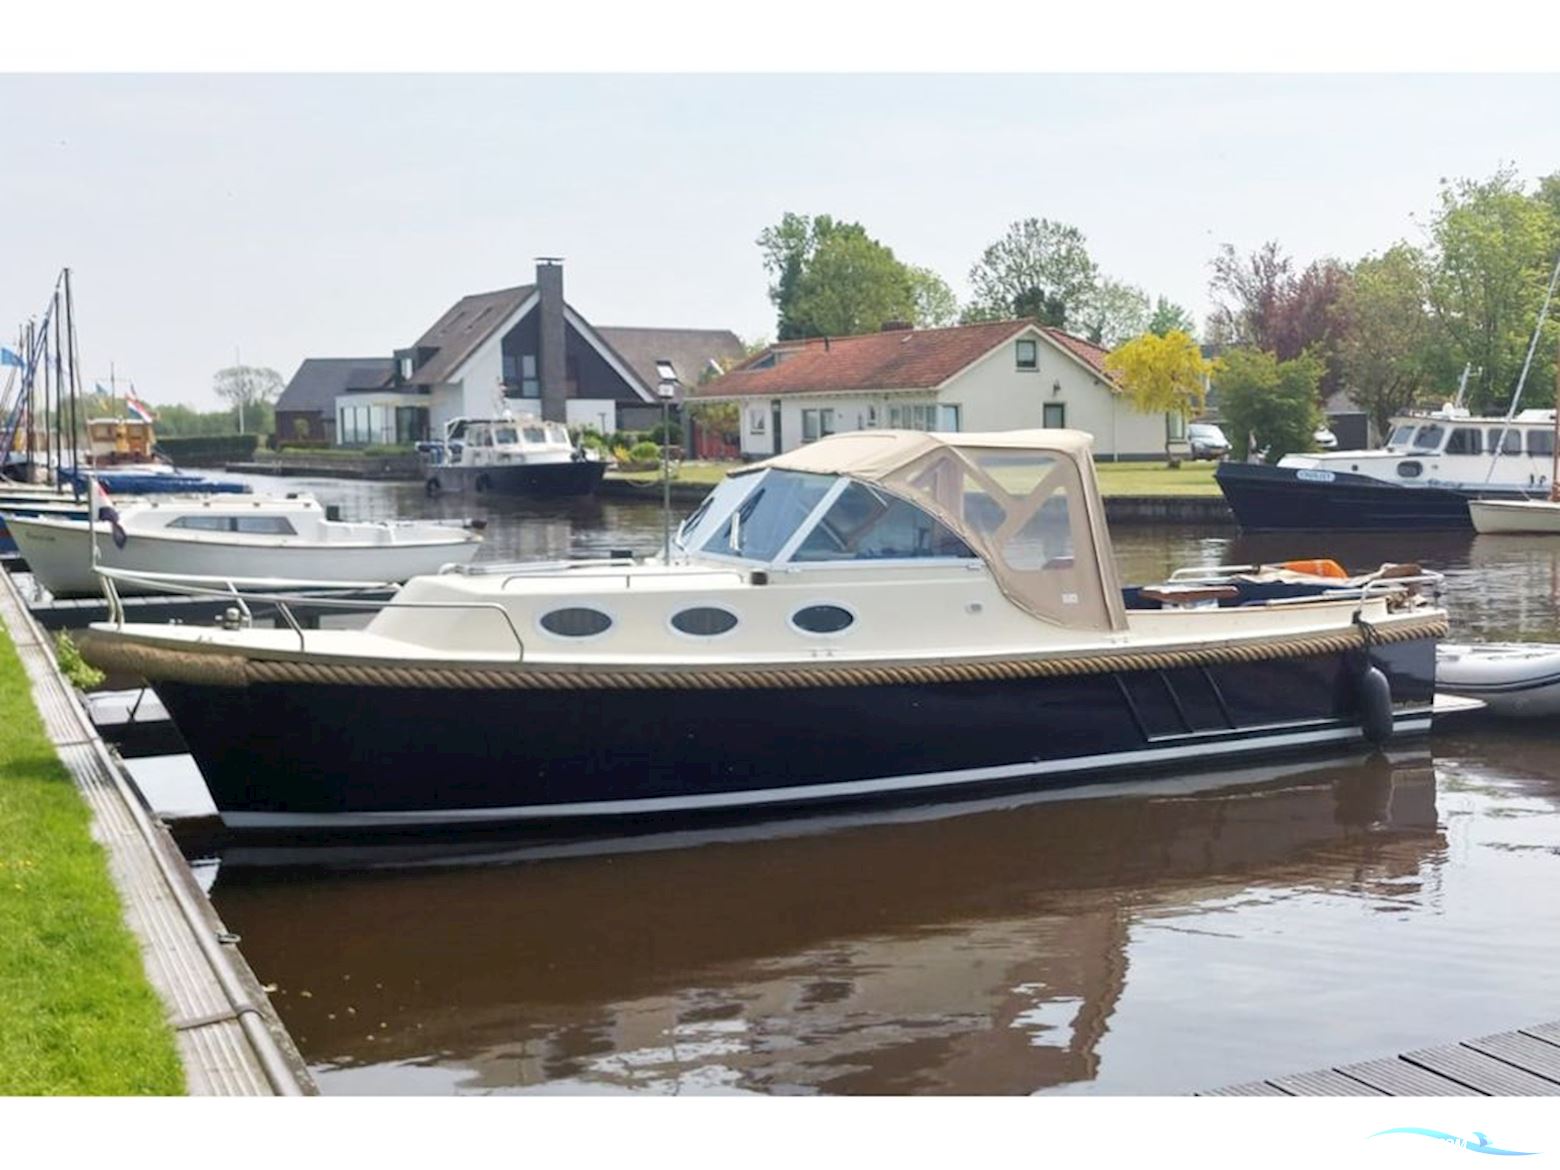 Maril 890 classic Motor boat 2002, with Yanmar engine, The Netherlands